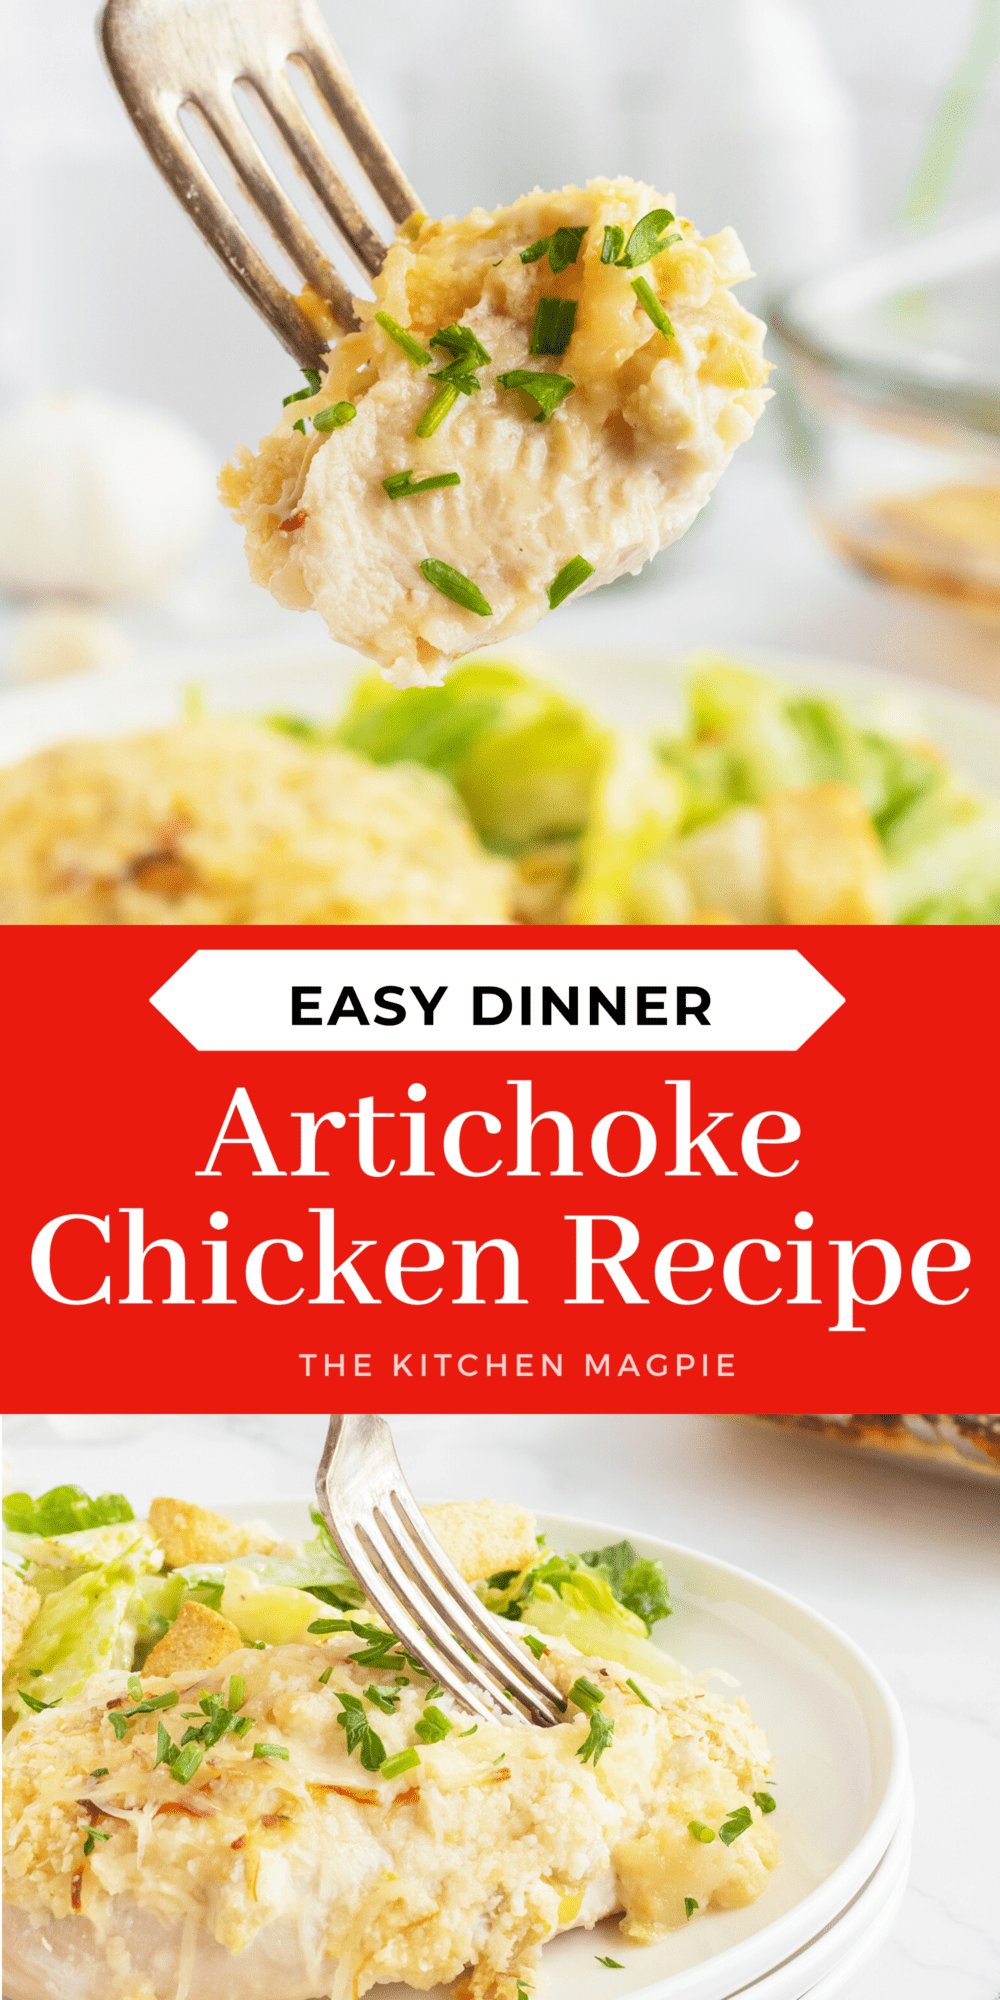 This recipe for artichoke chicken serves as a great gateway into the world of artichokes. It should contribute some tangy earthiness to a cheesy and fatty sauce over your chicken.